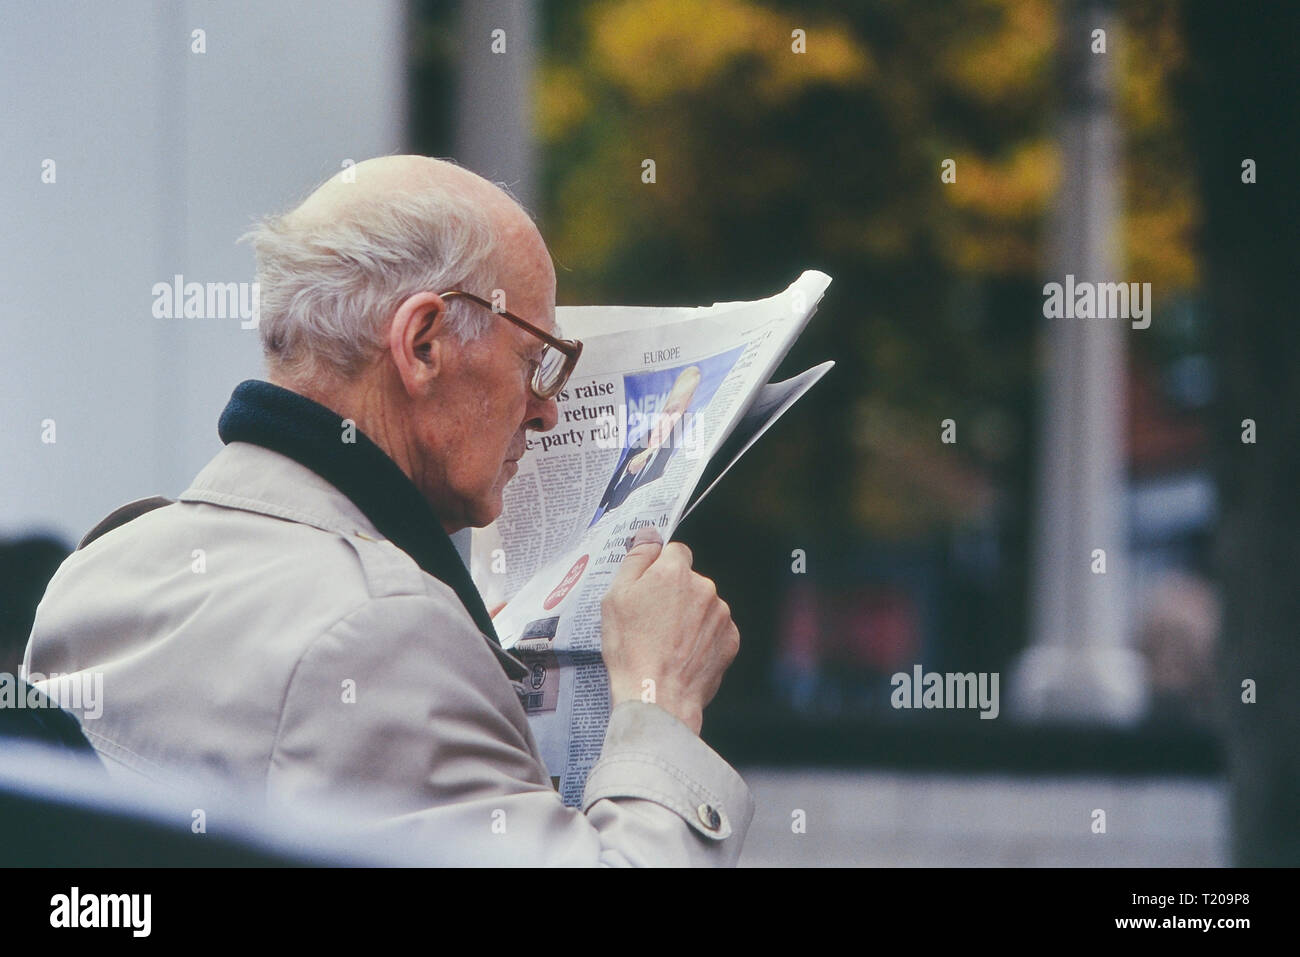 A mature man reading a newspaper up close to his face, England, UK Stock Photo